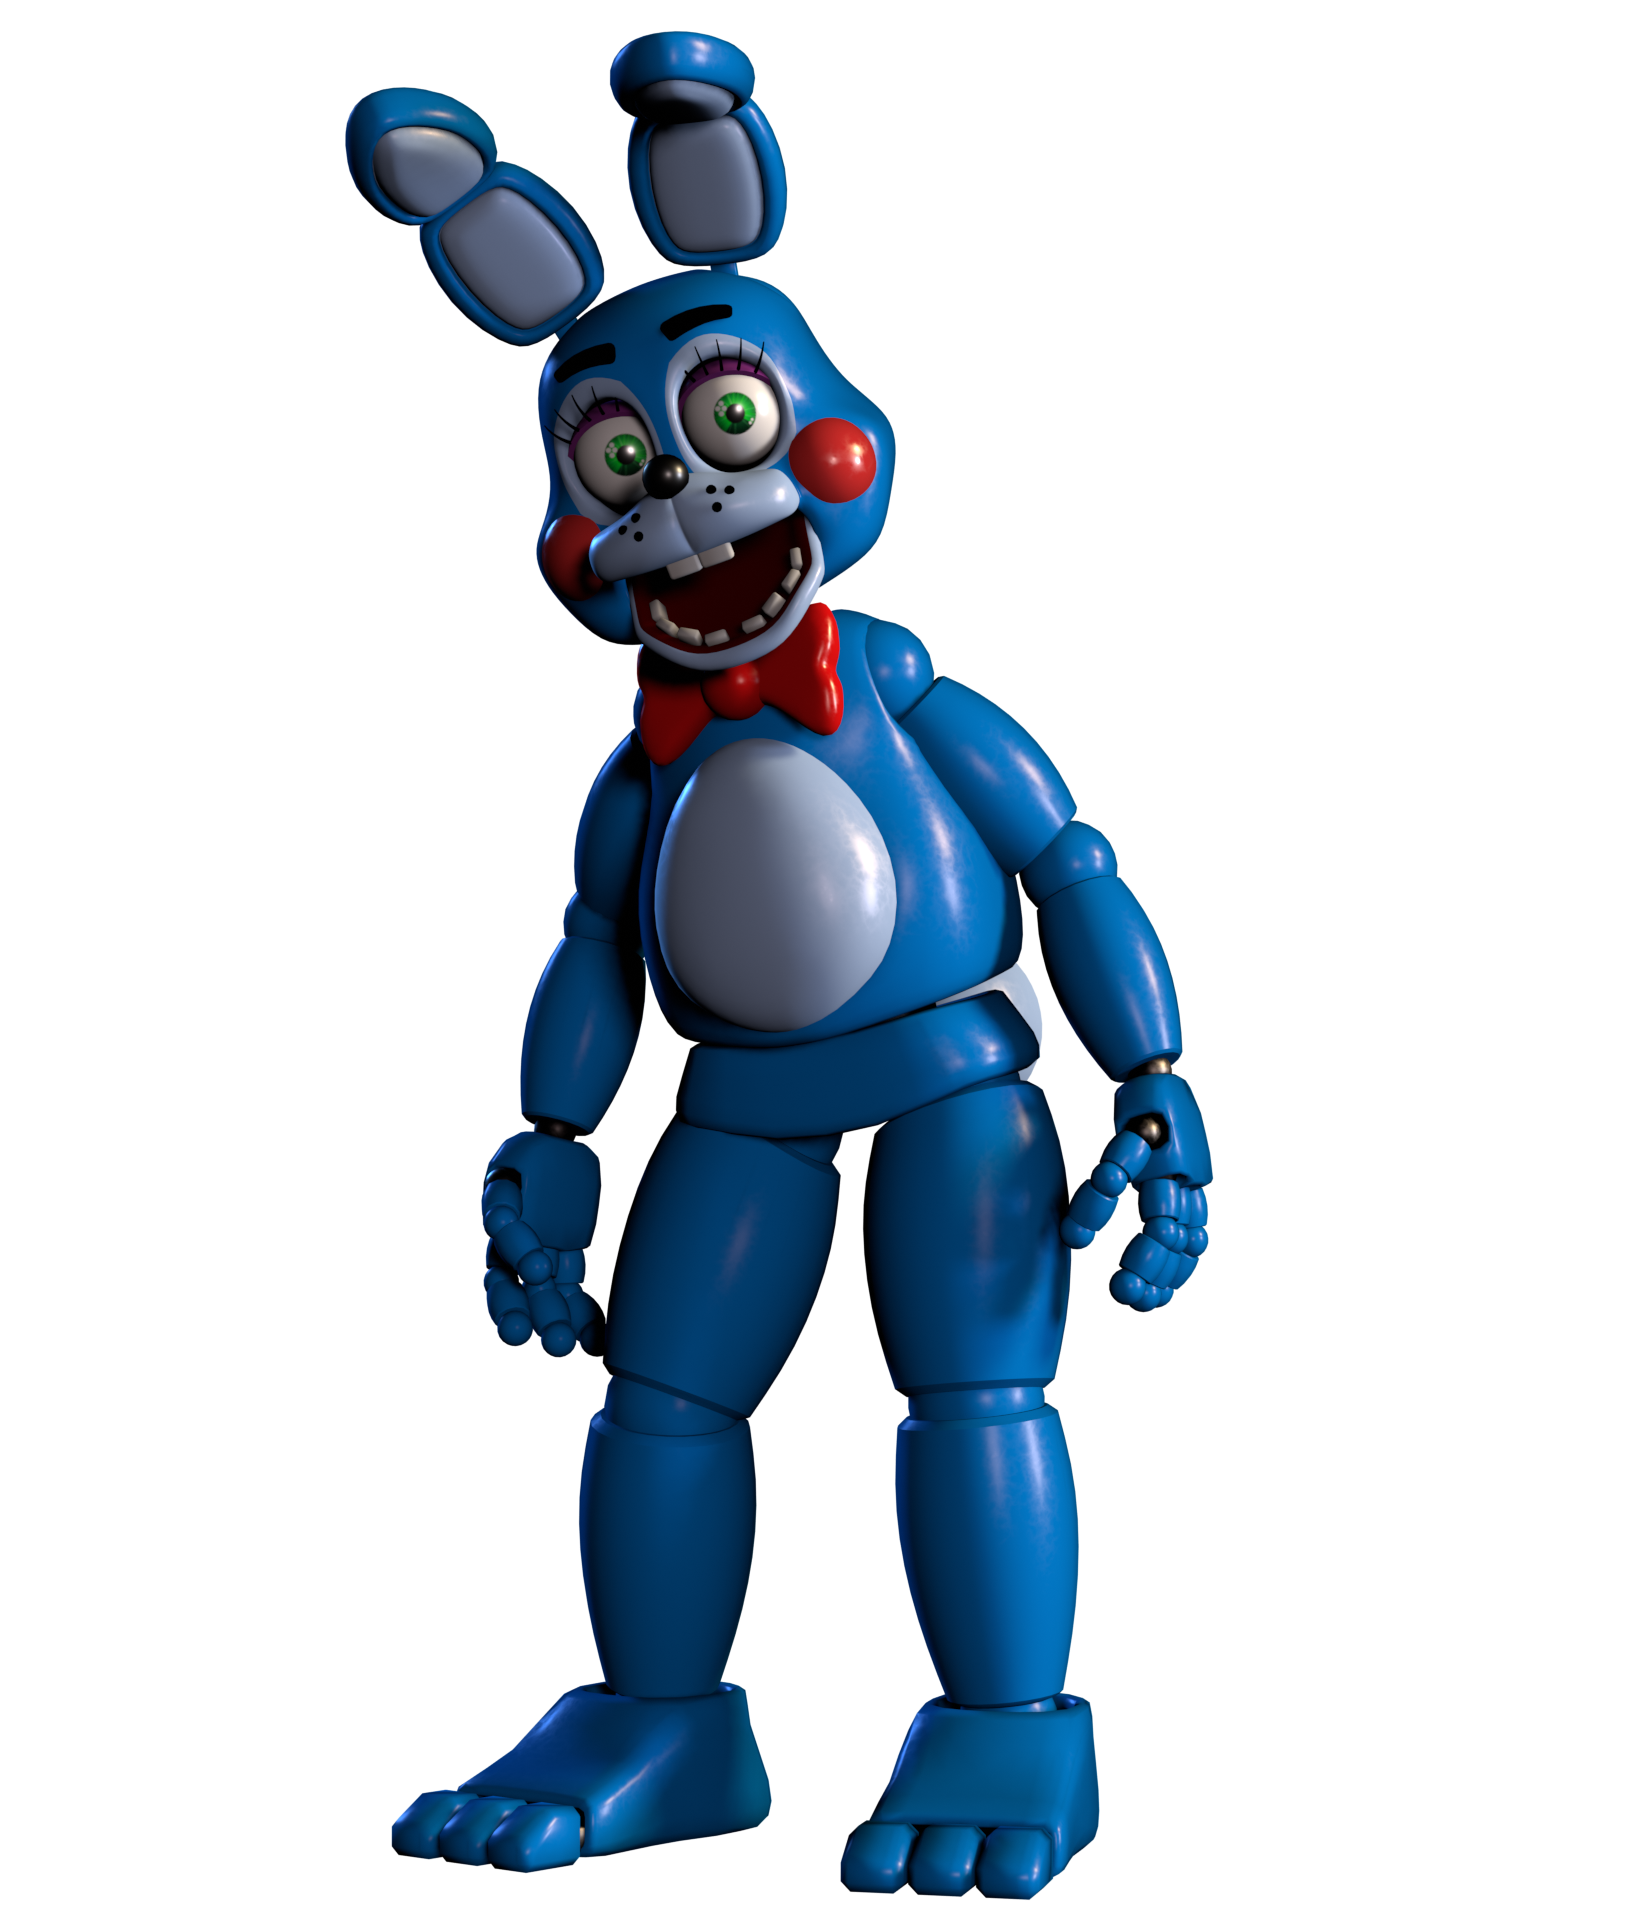 Bonnie Puppet, Five Nights at Freddy's Wiki